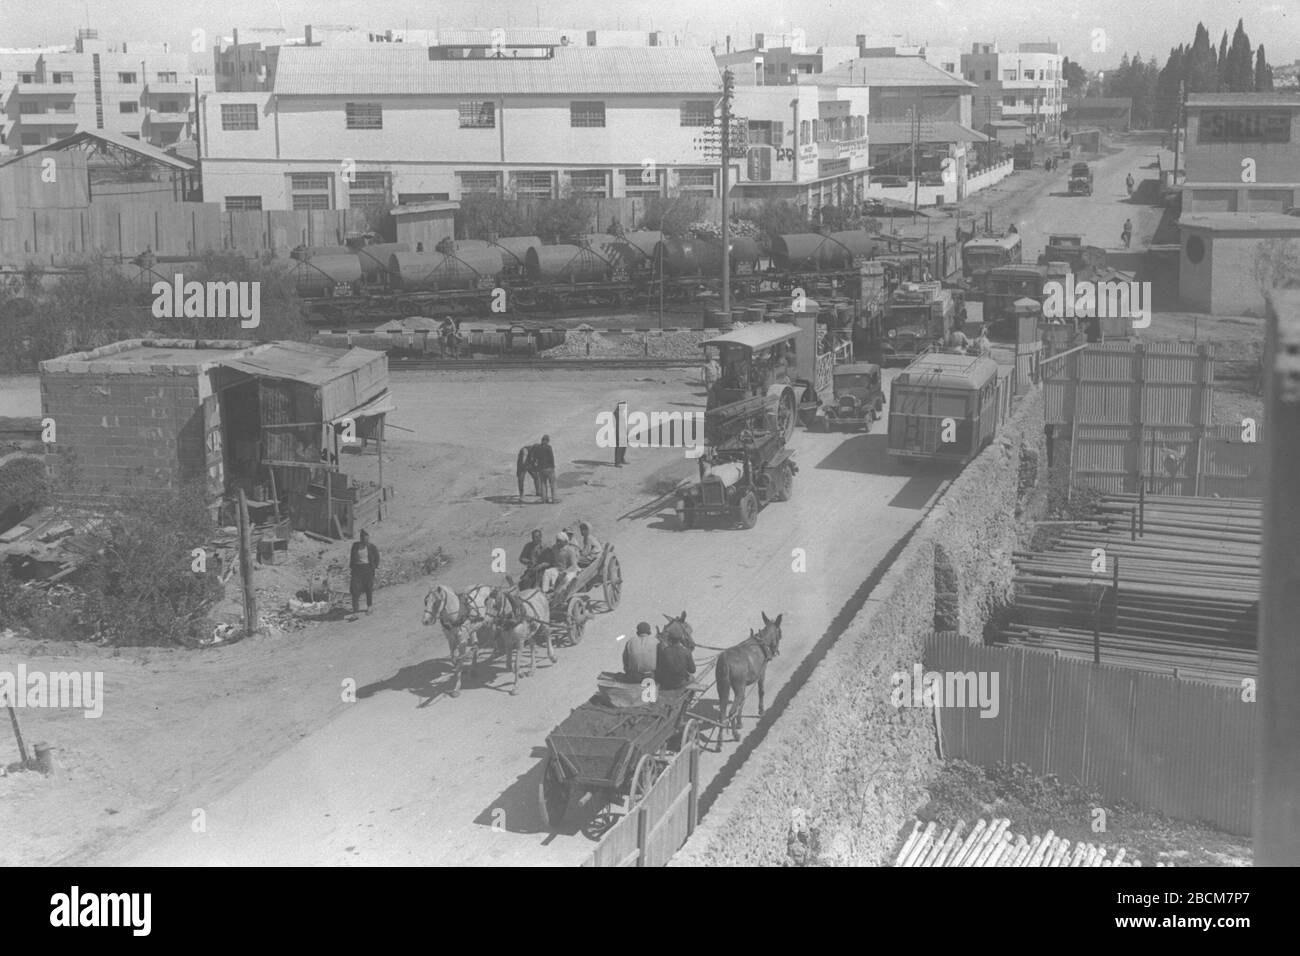 English The Petah Tikva Road Railway Crossing In Tel Aviv U E O O E E I O O Ss I I E U E E O E 01 06 1935 This Is Available From National Photo Collection Of Israel Photography Dept